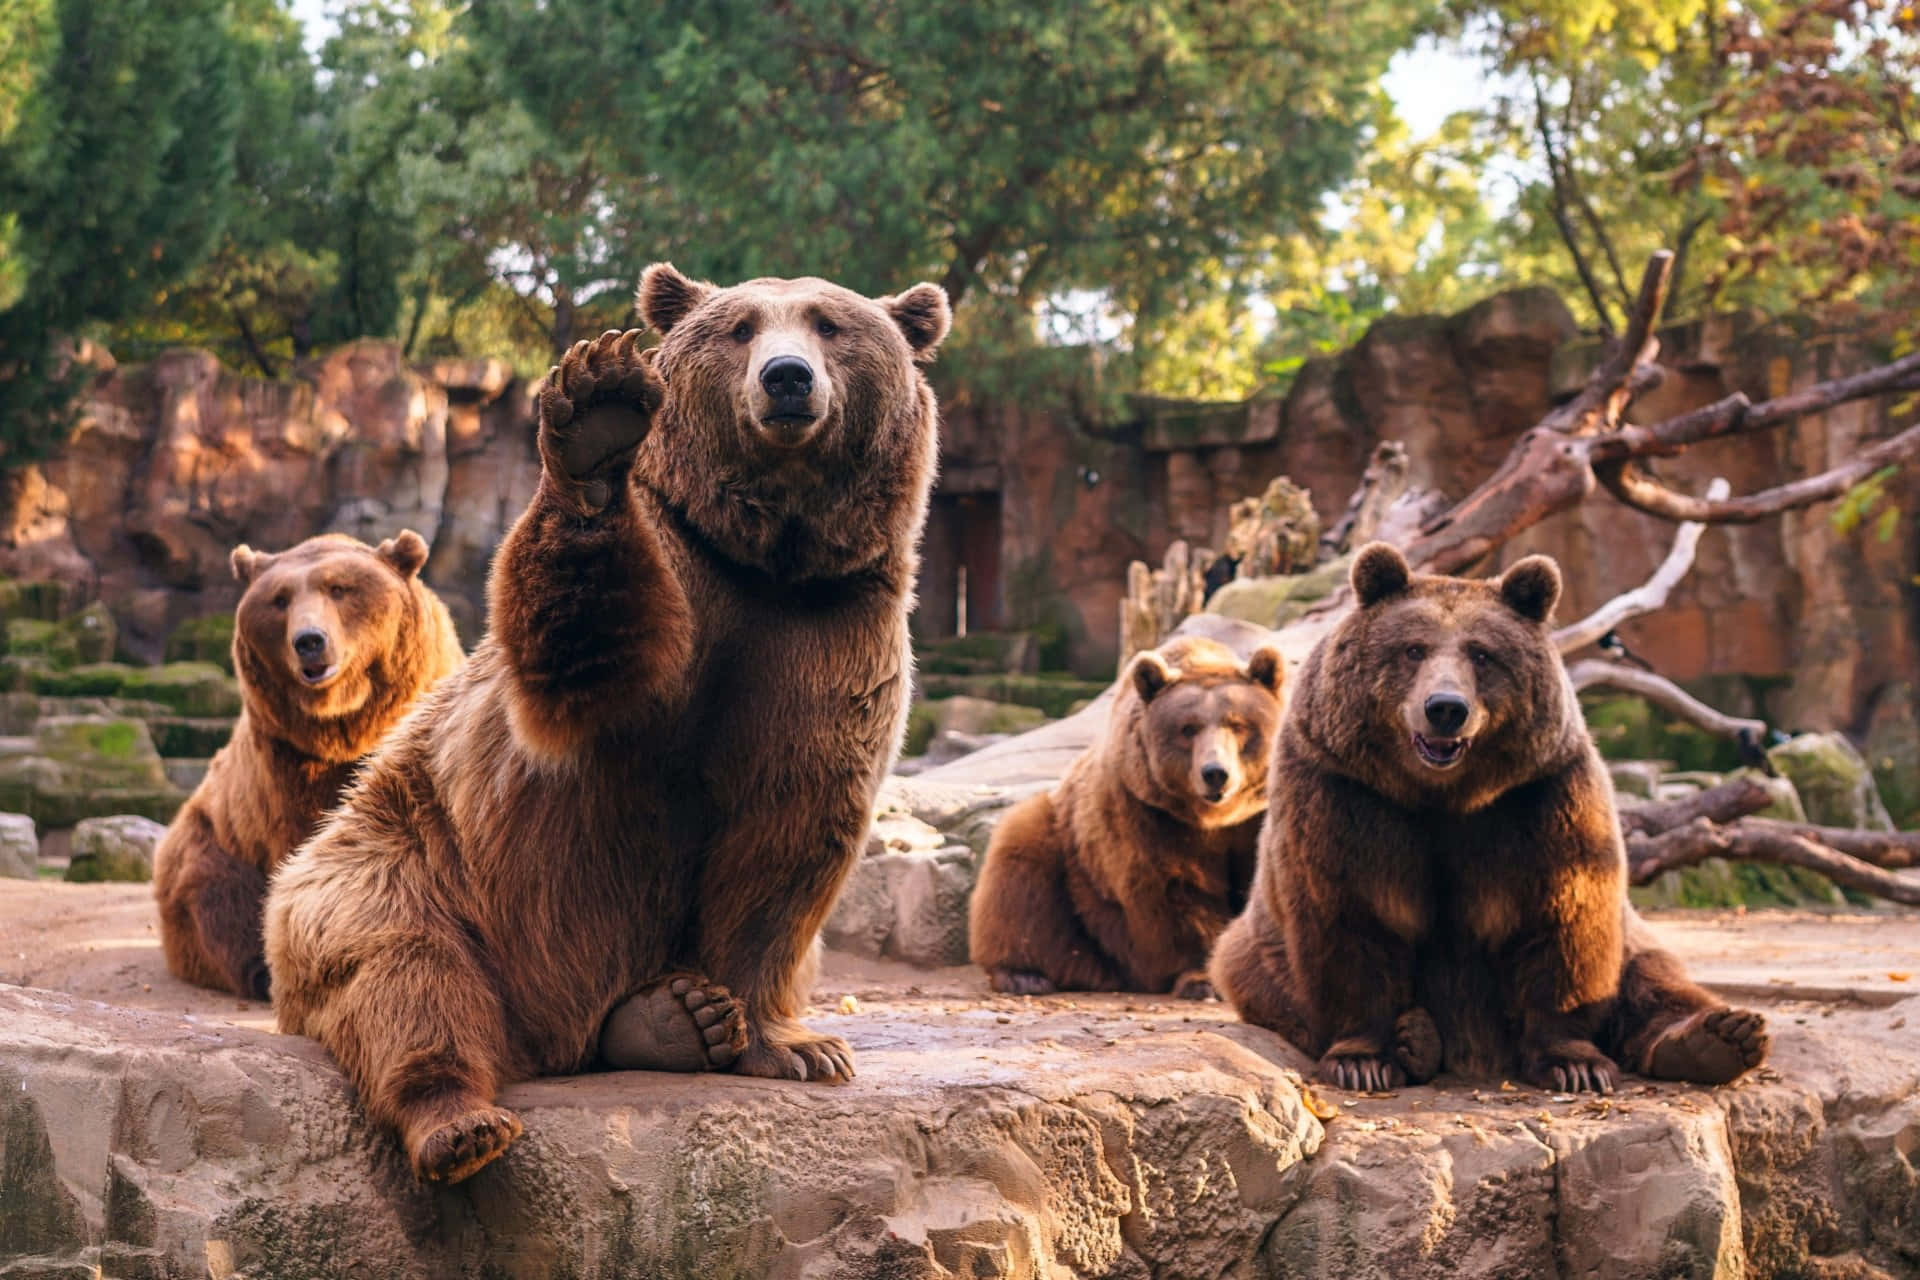 Caption: Majestic Grizzly Bears At The Zoo Background